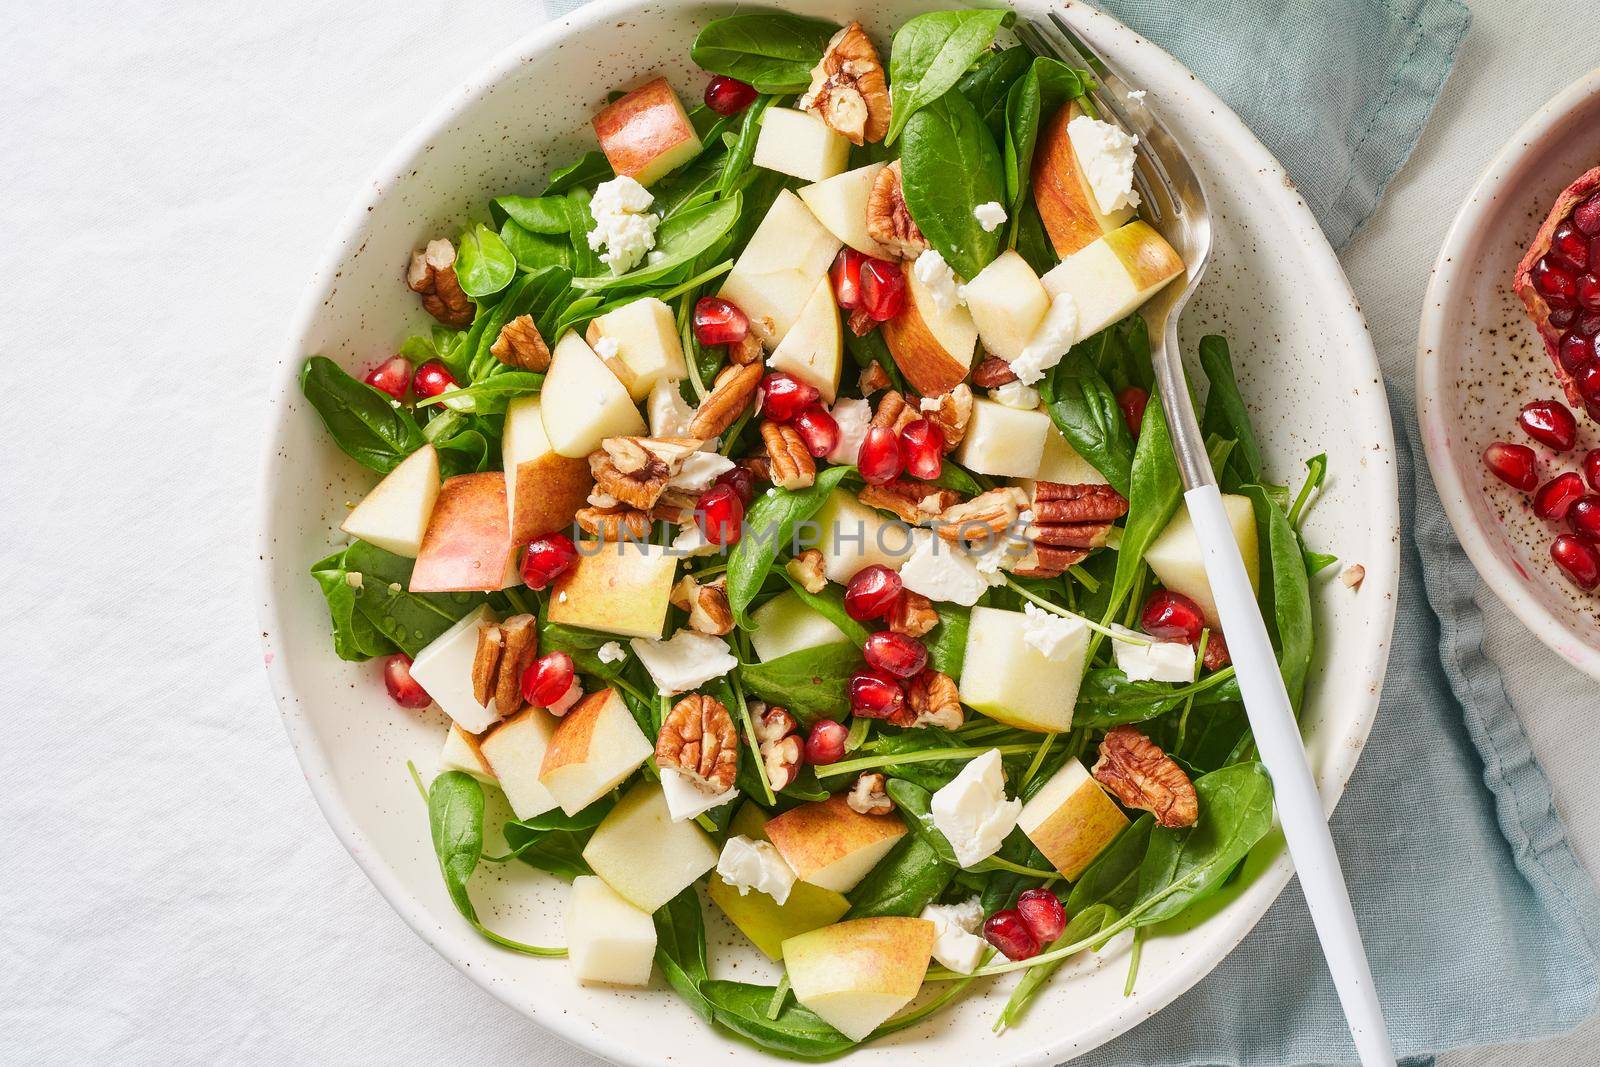 Fruits salad with nuts, balanced food, clean eating. Spinach with apples, pecans and feta, garnished with pomegranate seeds in bowl on table with white tablecloth.